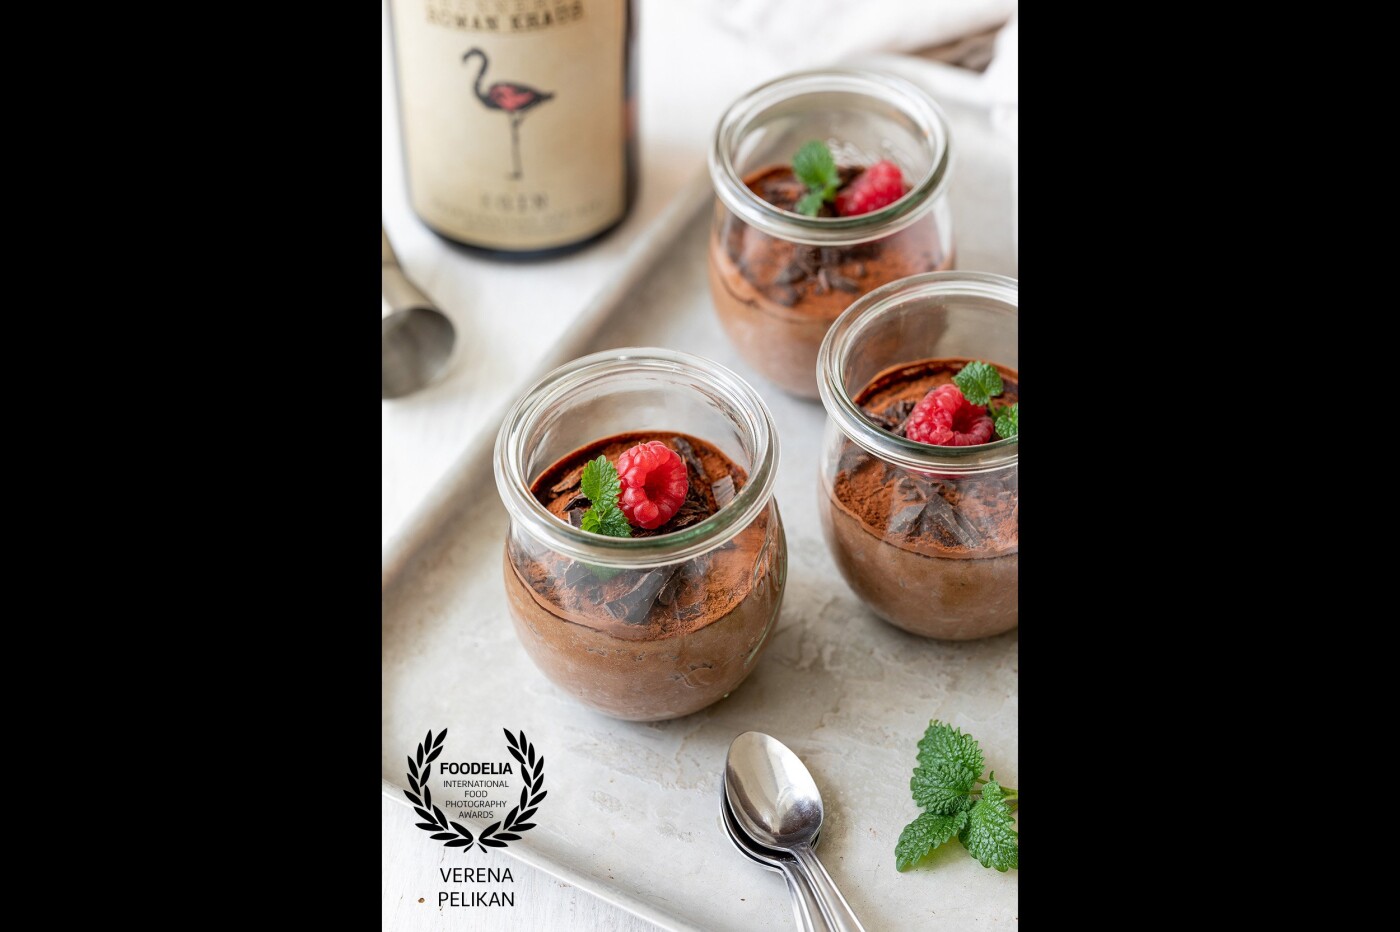 Mousse au Chocolat with refined with Gin. A real treat served as a dessert in a glass.<br />
You can find the recipe on my website: https://www.sweetsandlifestyle.com/mousse-au-chocolat-mit-gin/